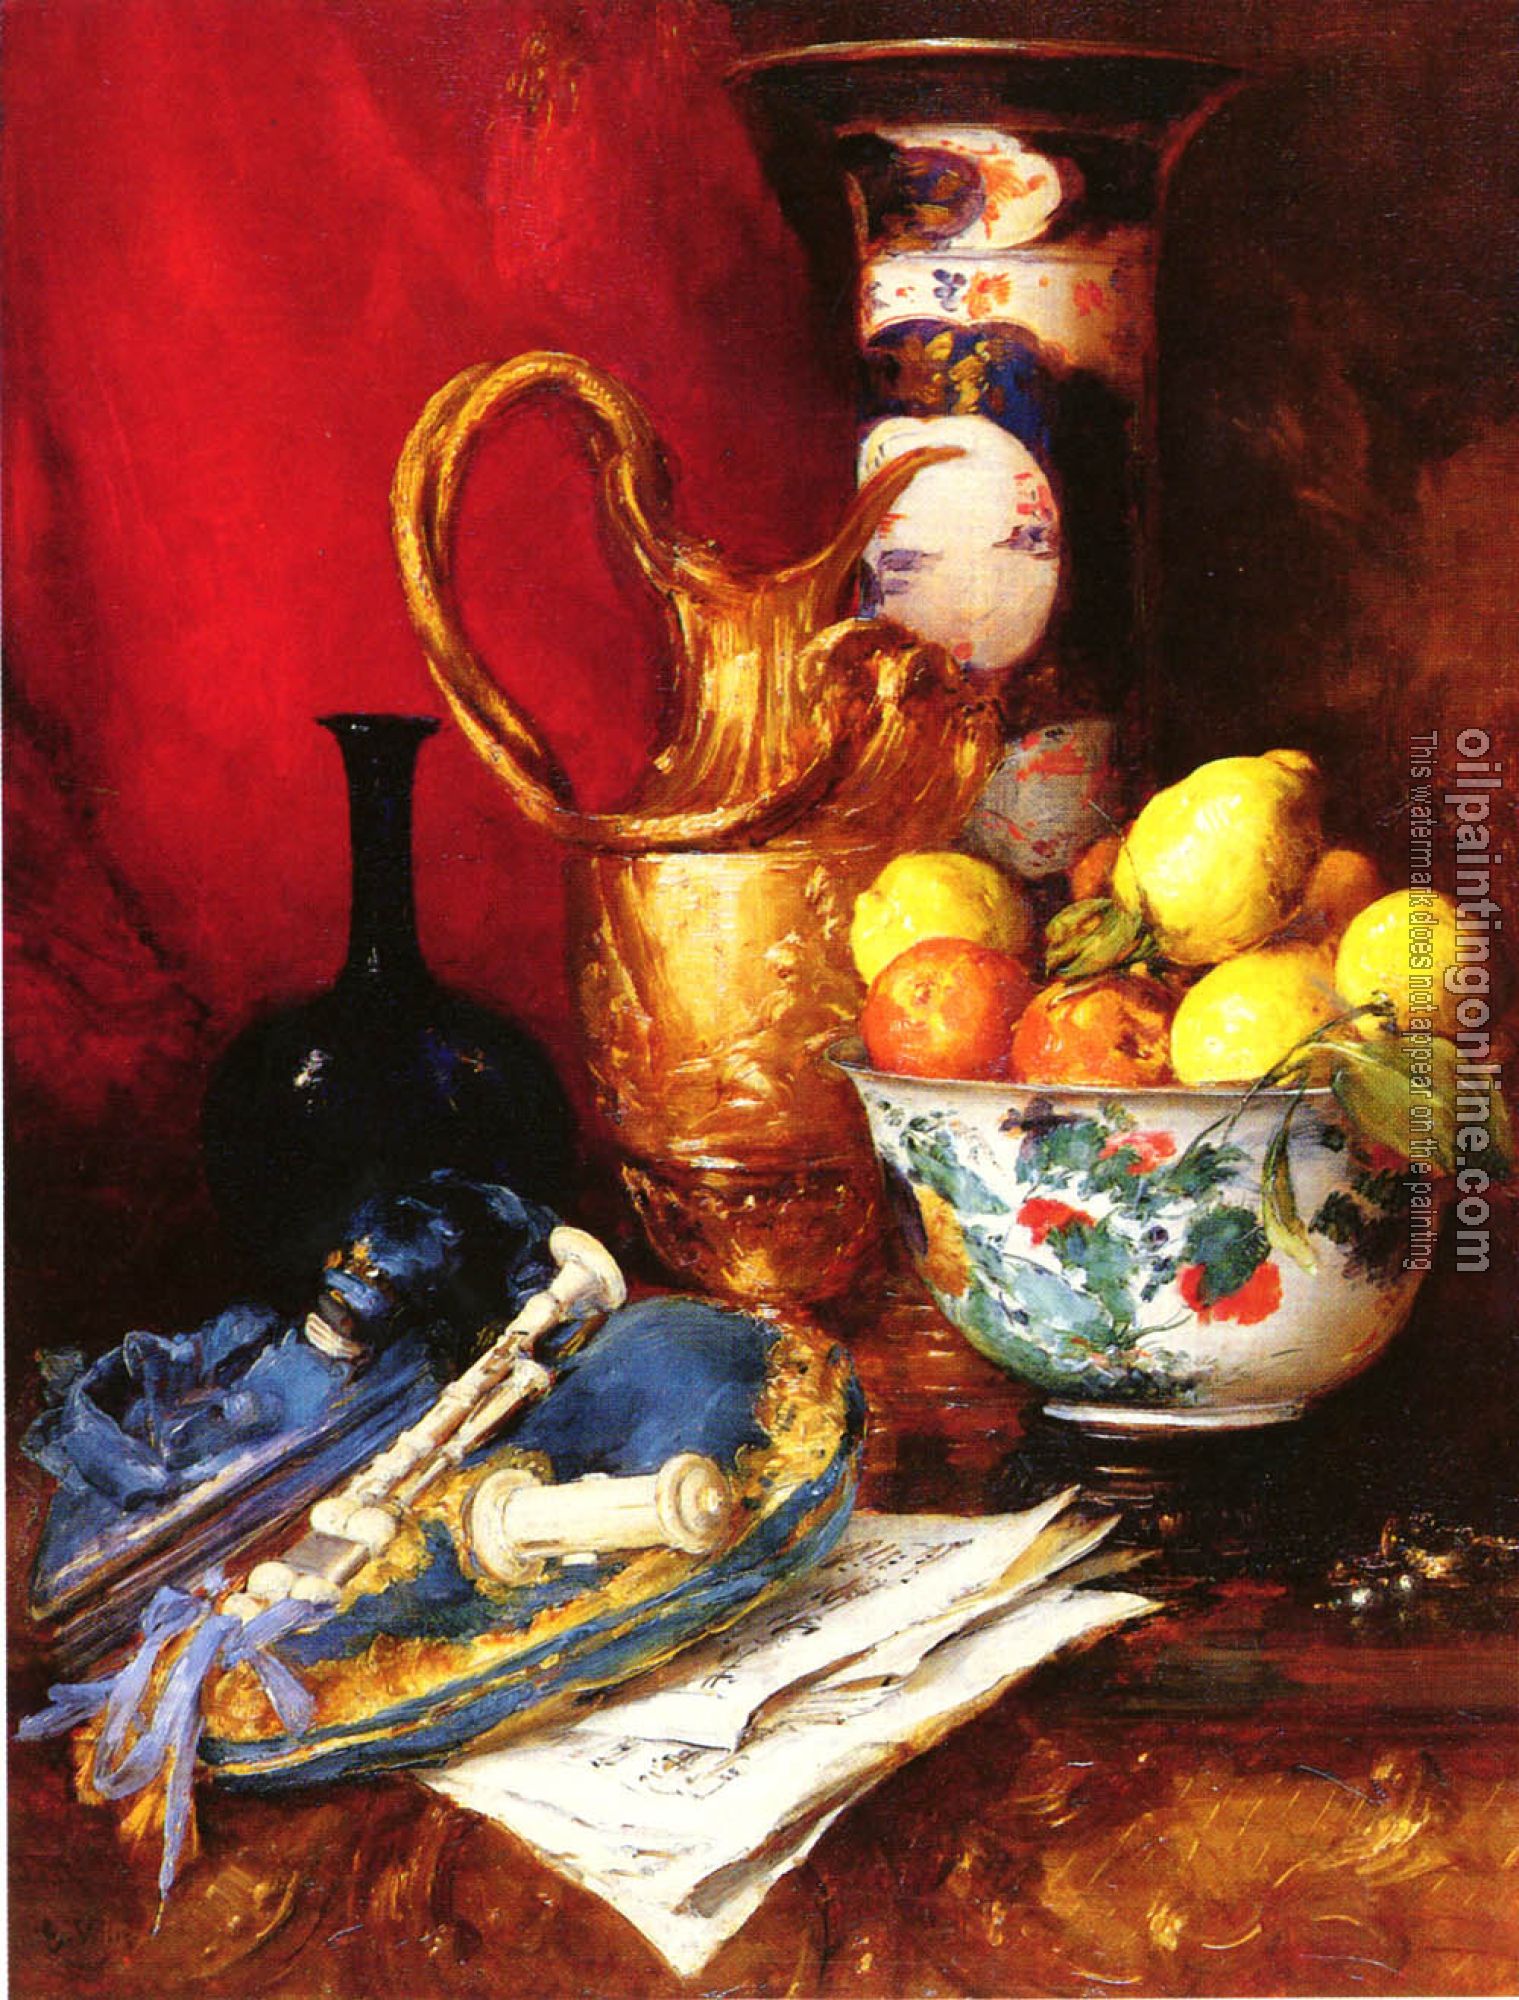 Vollon, Antoine - A Still Life with a Bowl of Fruit